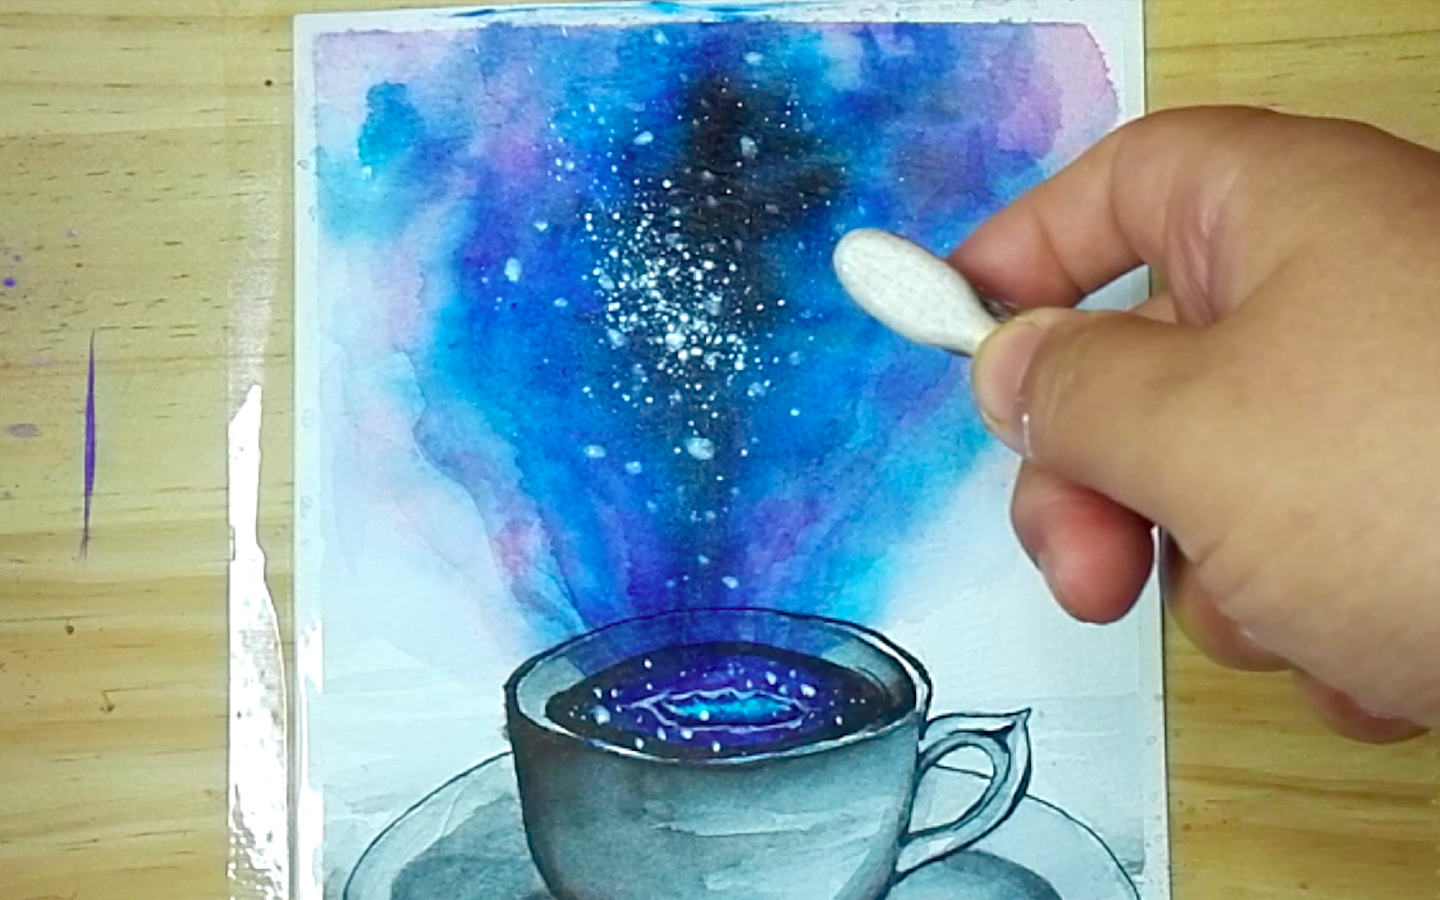 How to draw Galaxy Coffee with watercolor step by step tutorial